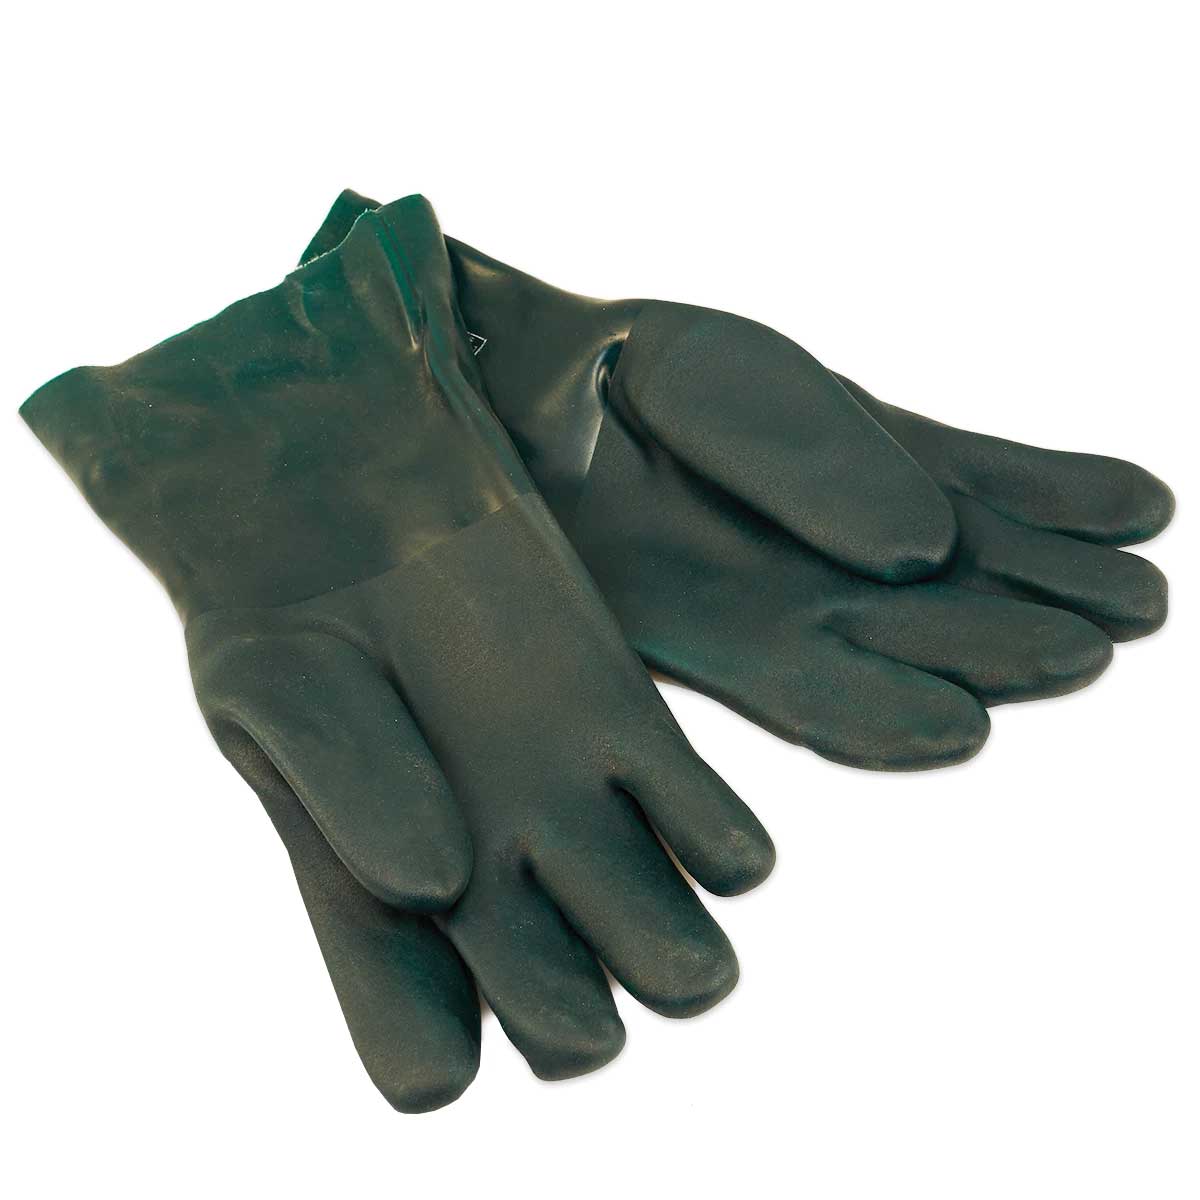 Rubber Gloves for Hot Syrup or Water, 14" from finger tip to end of the cuff. These gloves work great for cleaning a filter press or for cleaning evaporator pans.